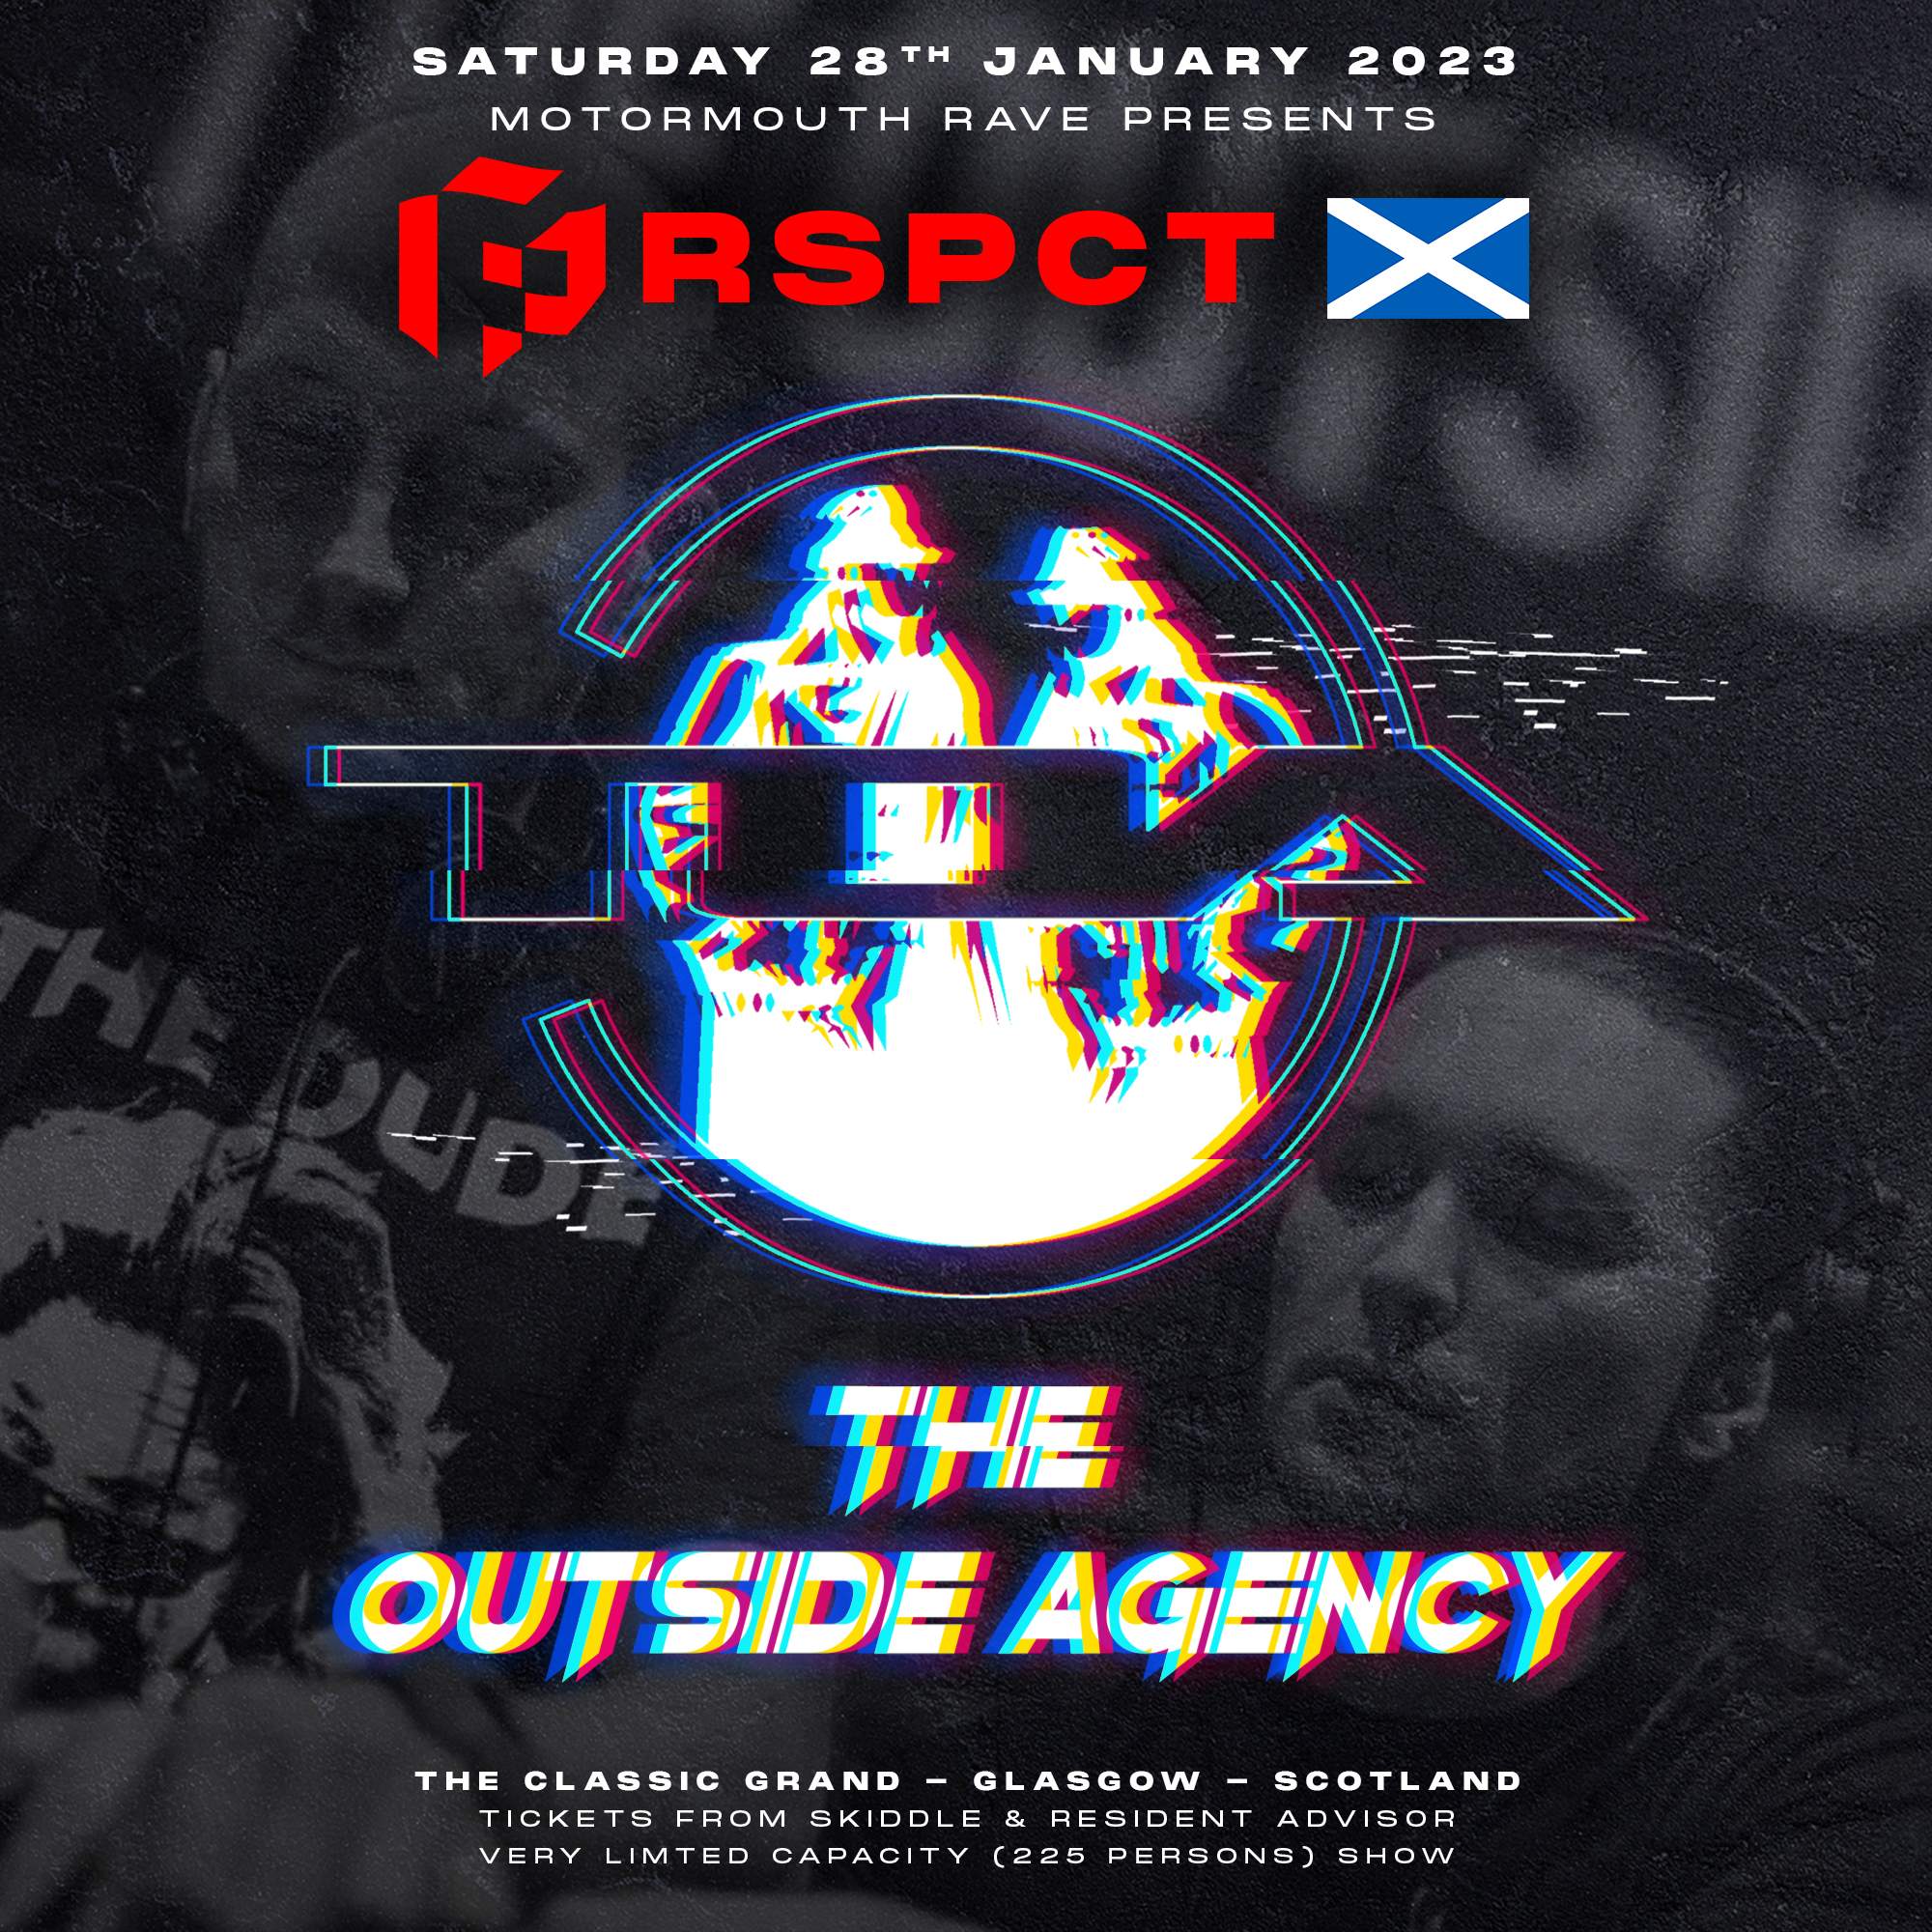 Motormouth presents PRSPCT - Scotland feat Ghost In The Machine, The Outside Agency, Thrasher - Página trasera